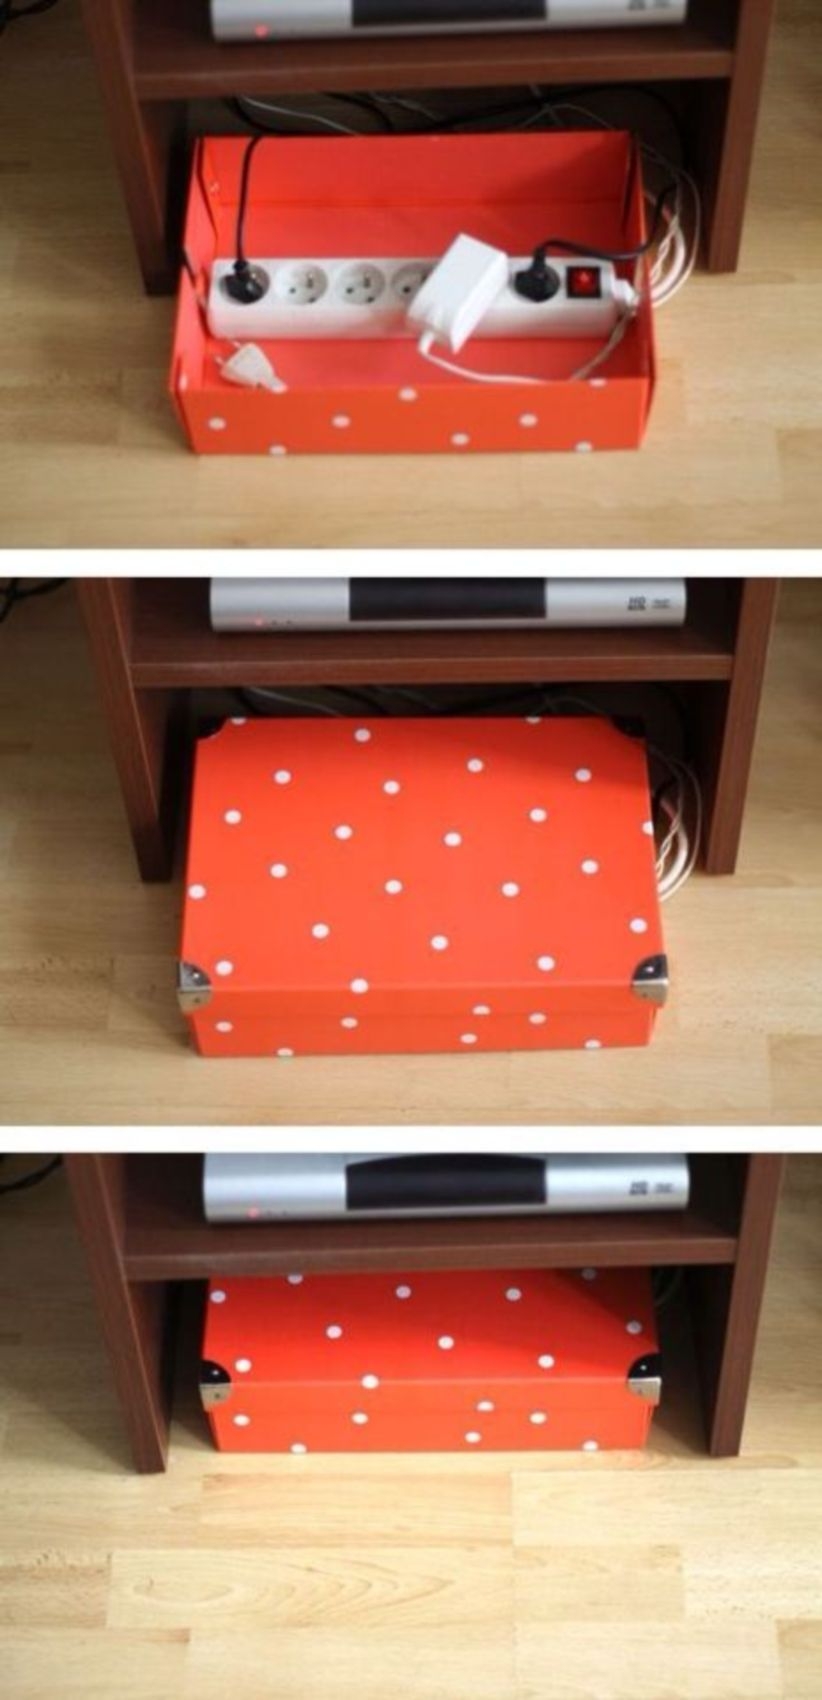 Hide ugly power strip electrical outlet cords in a pretty decorative box